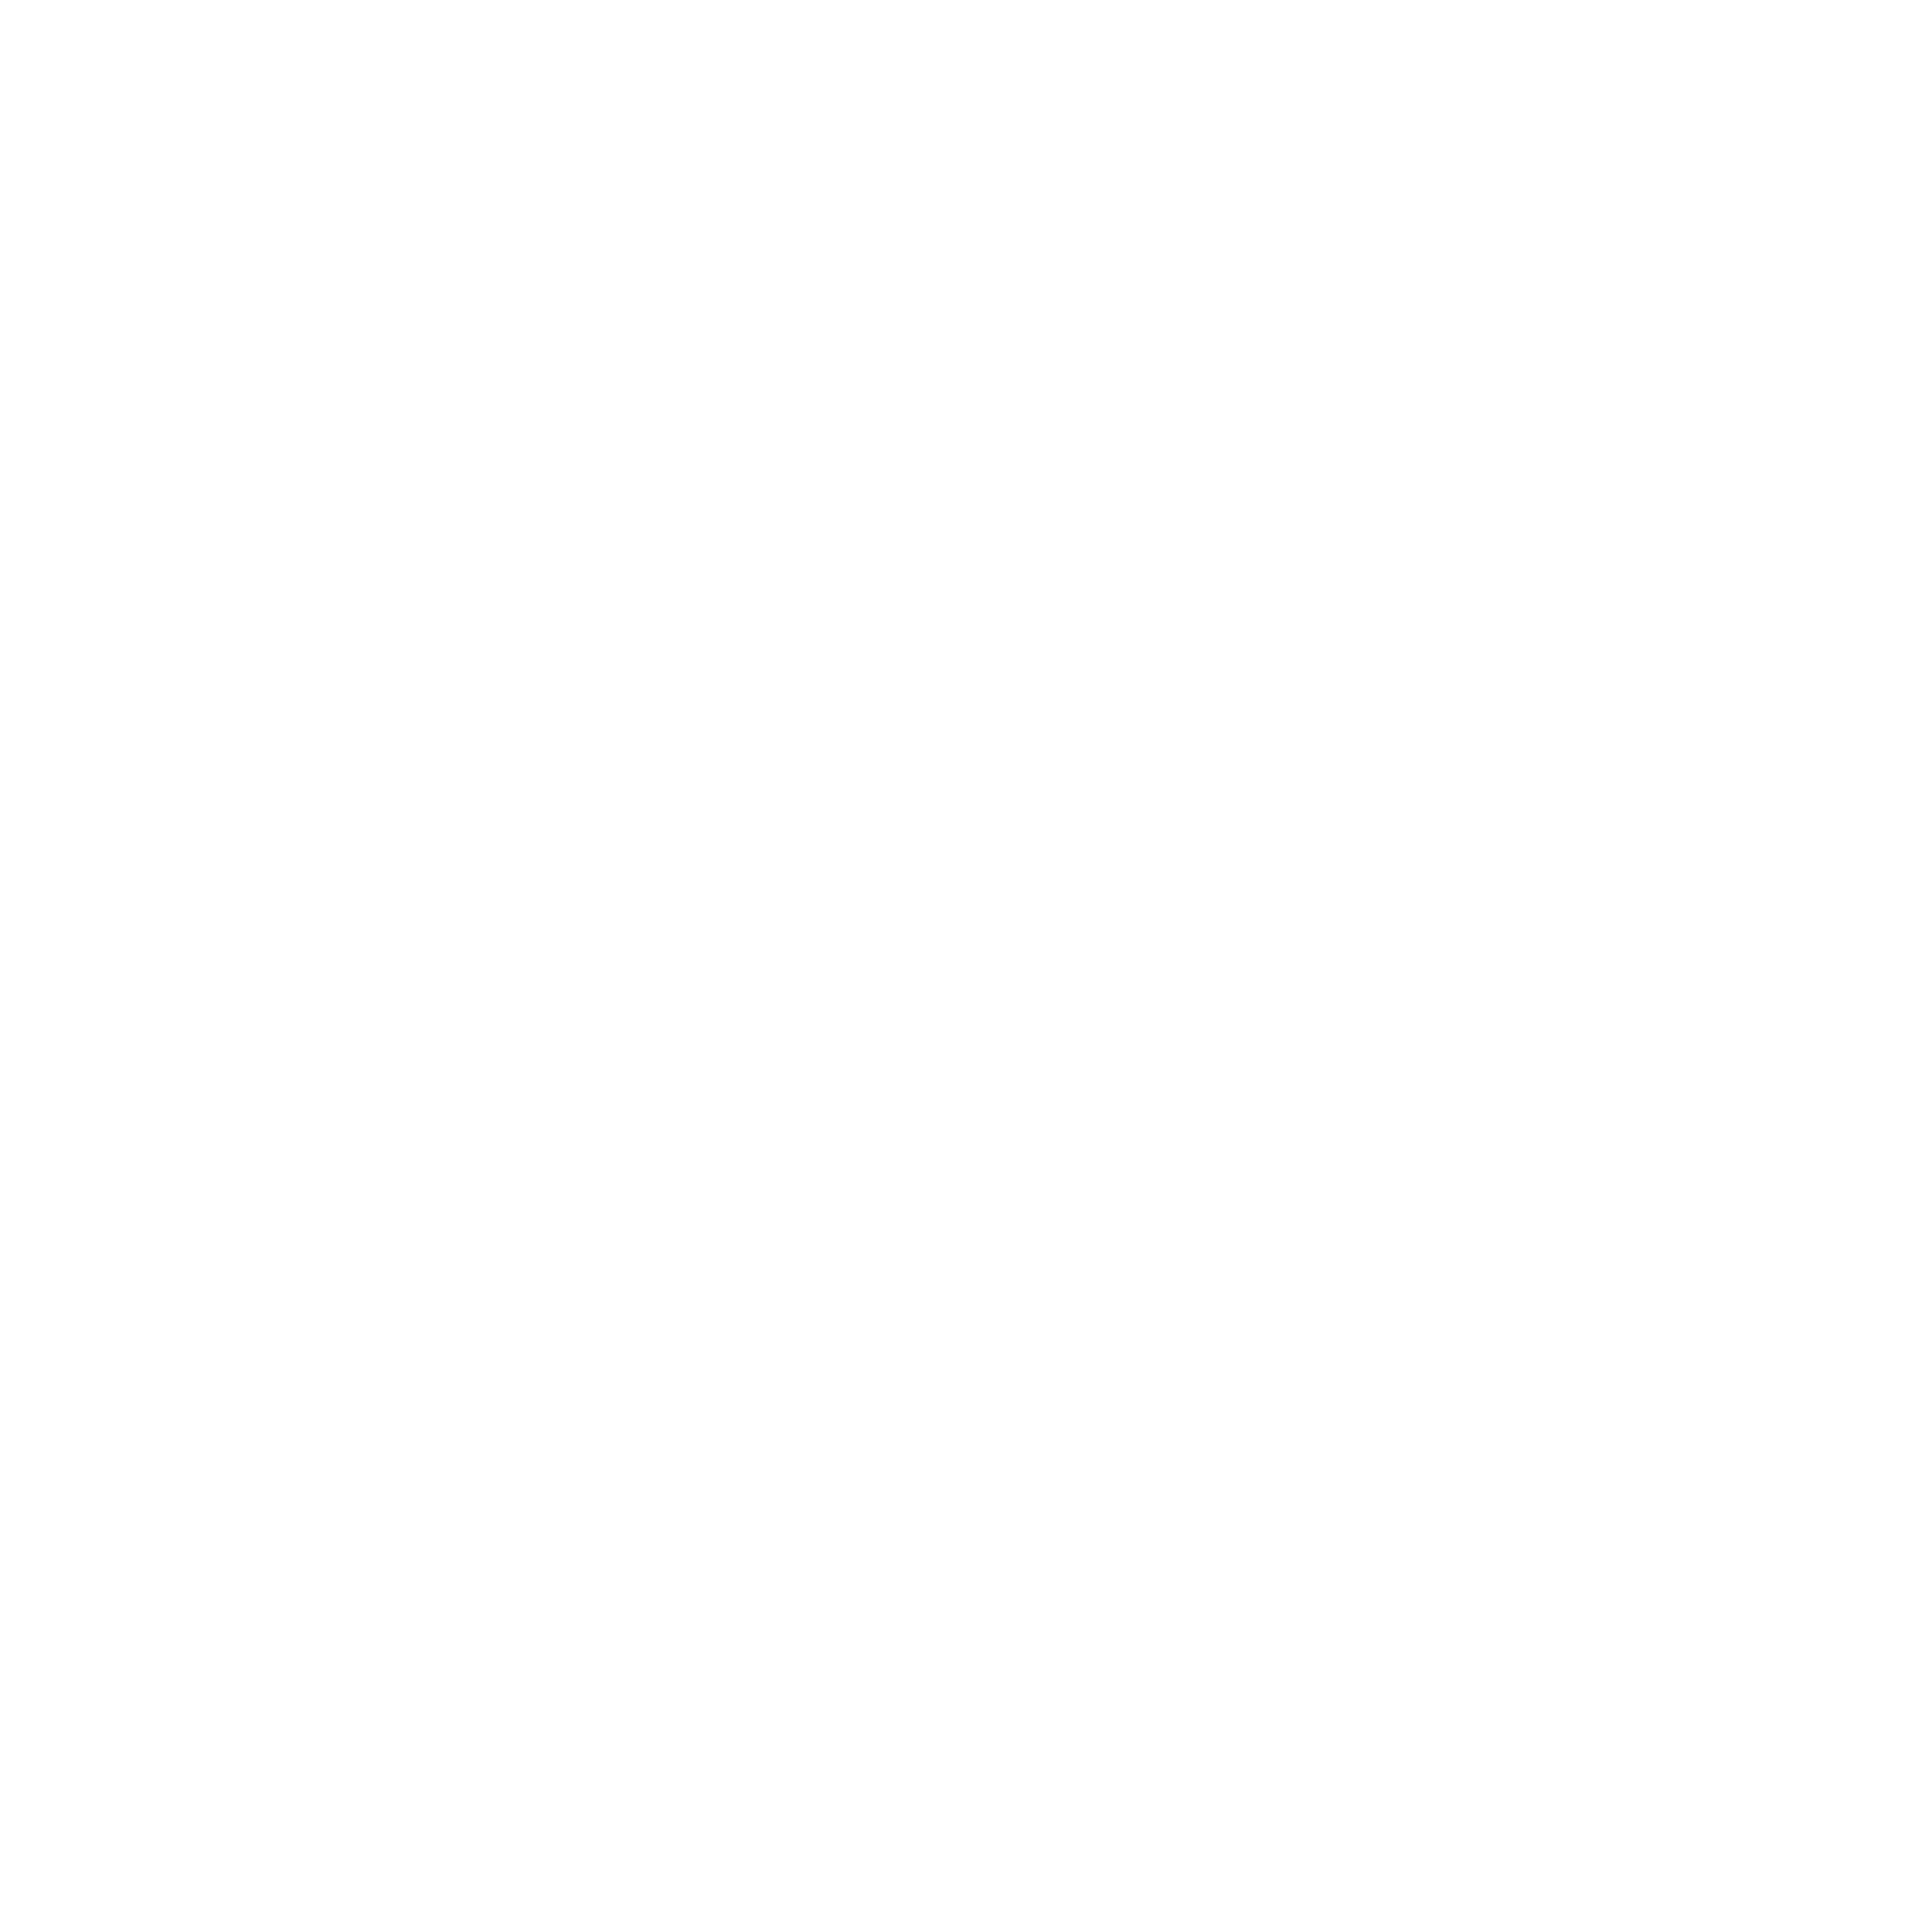 Aloha Airlines Logo - Aloha Airlines 02 Logo PNG Transparent & SVG Vector - Freebie Supply